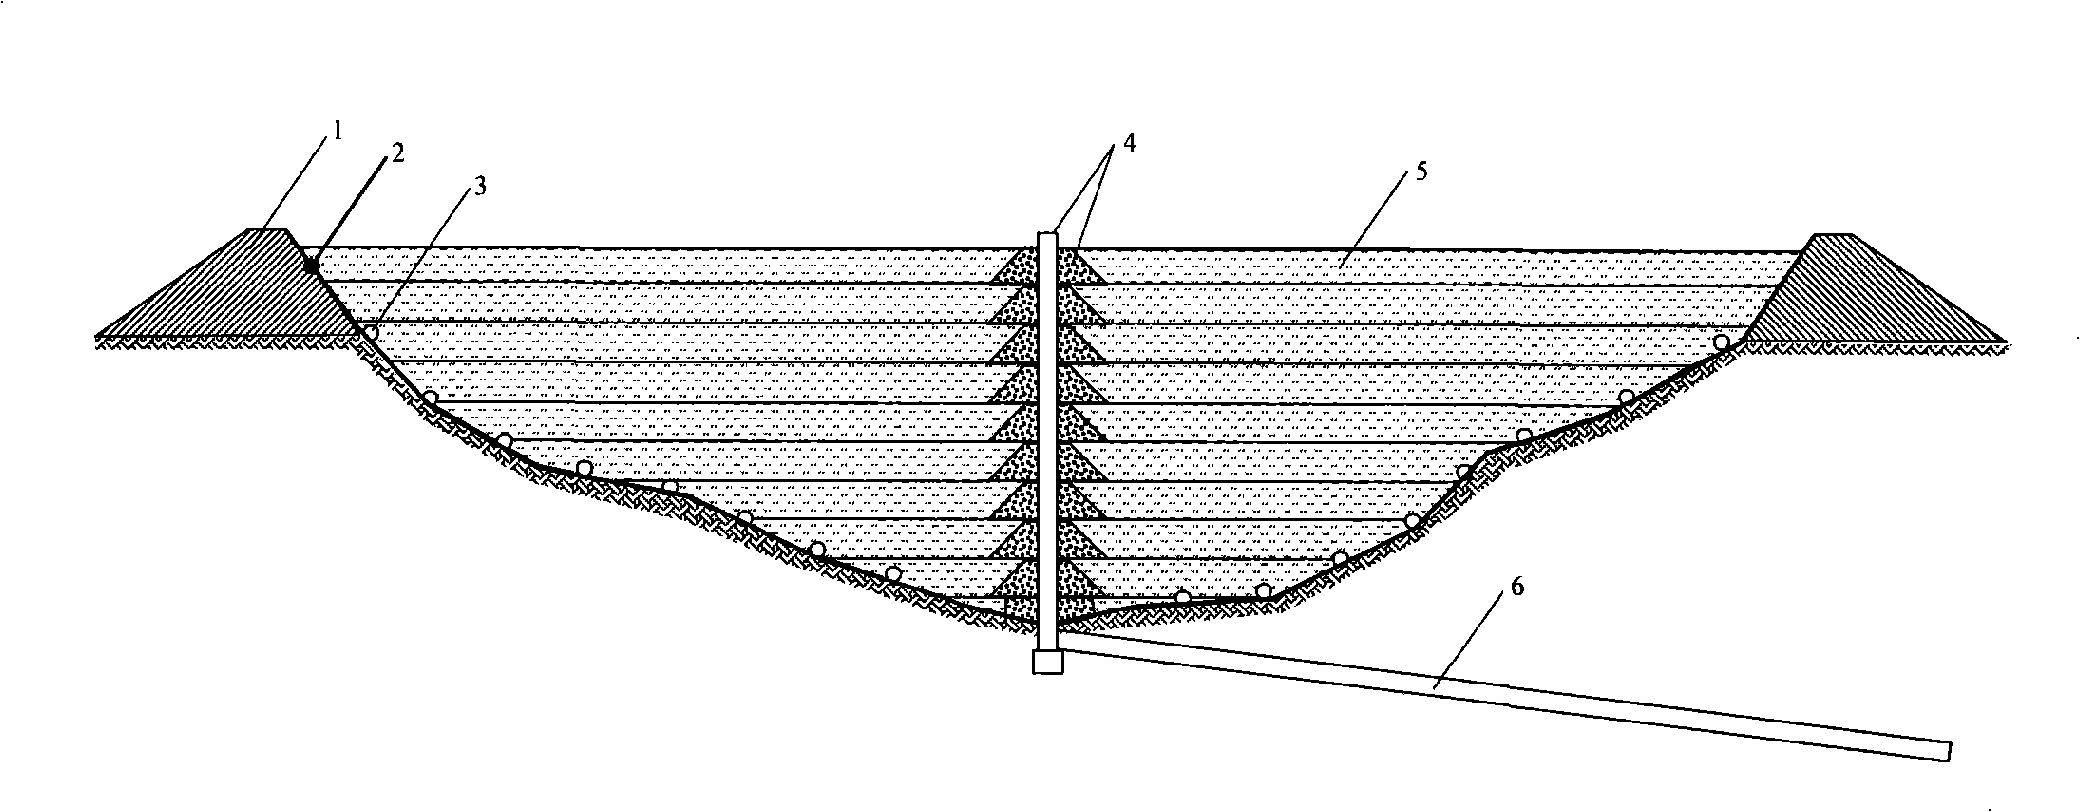 Dry method red mud storage yard drainage method and apparatus having forced drainage function